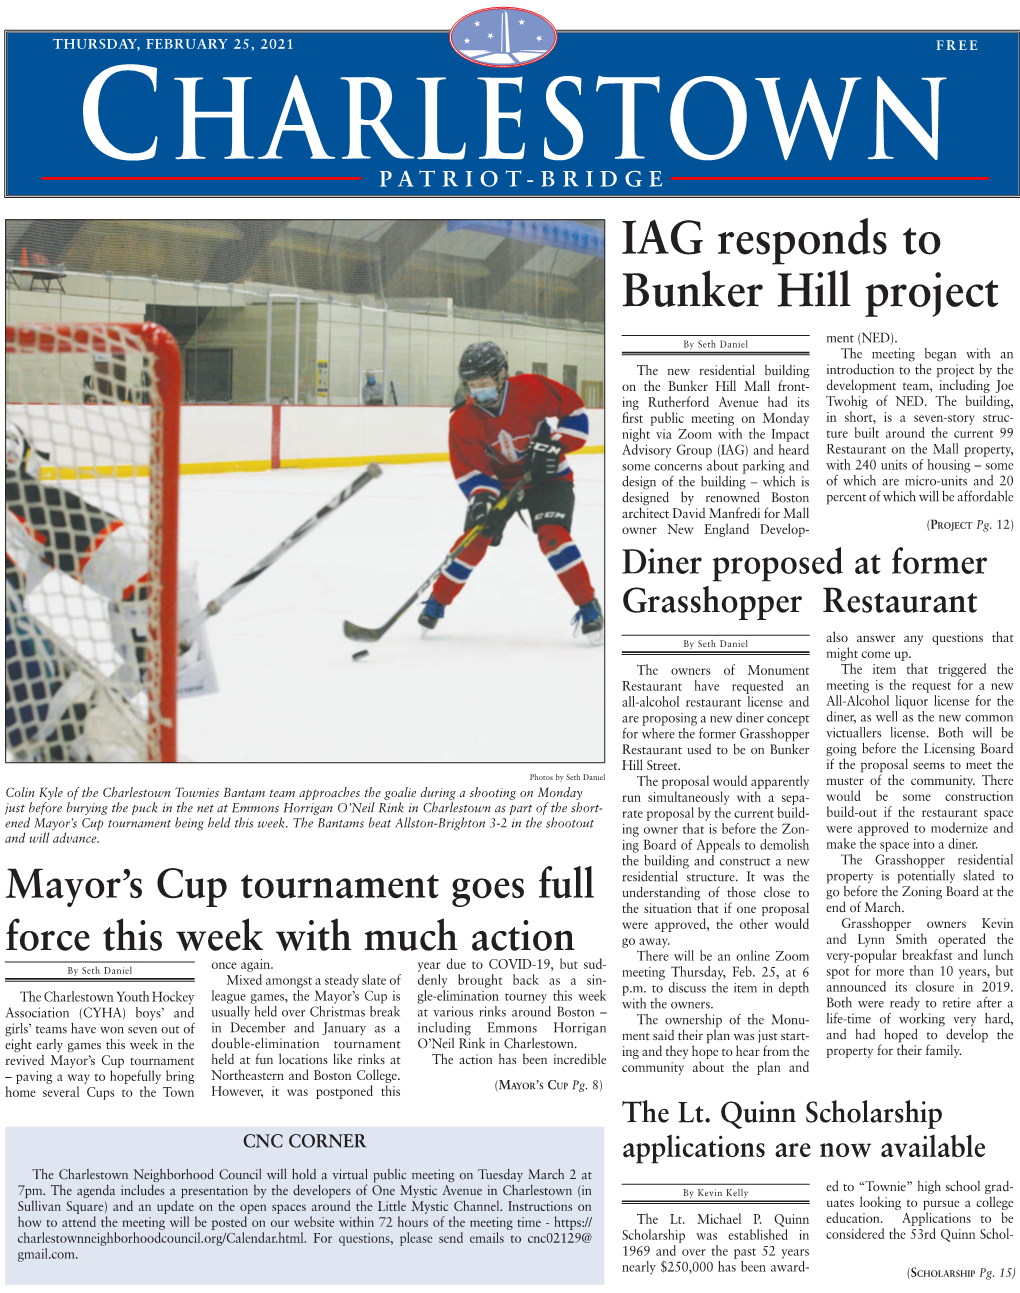 IAG Responds to Bunker Hill Project